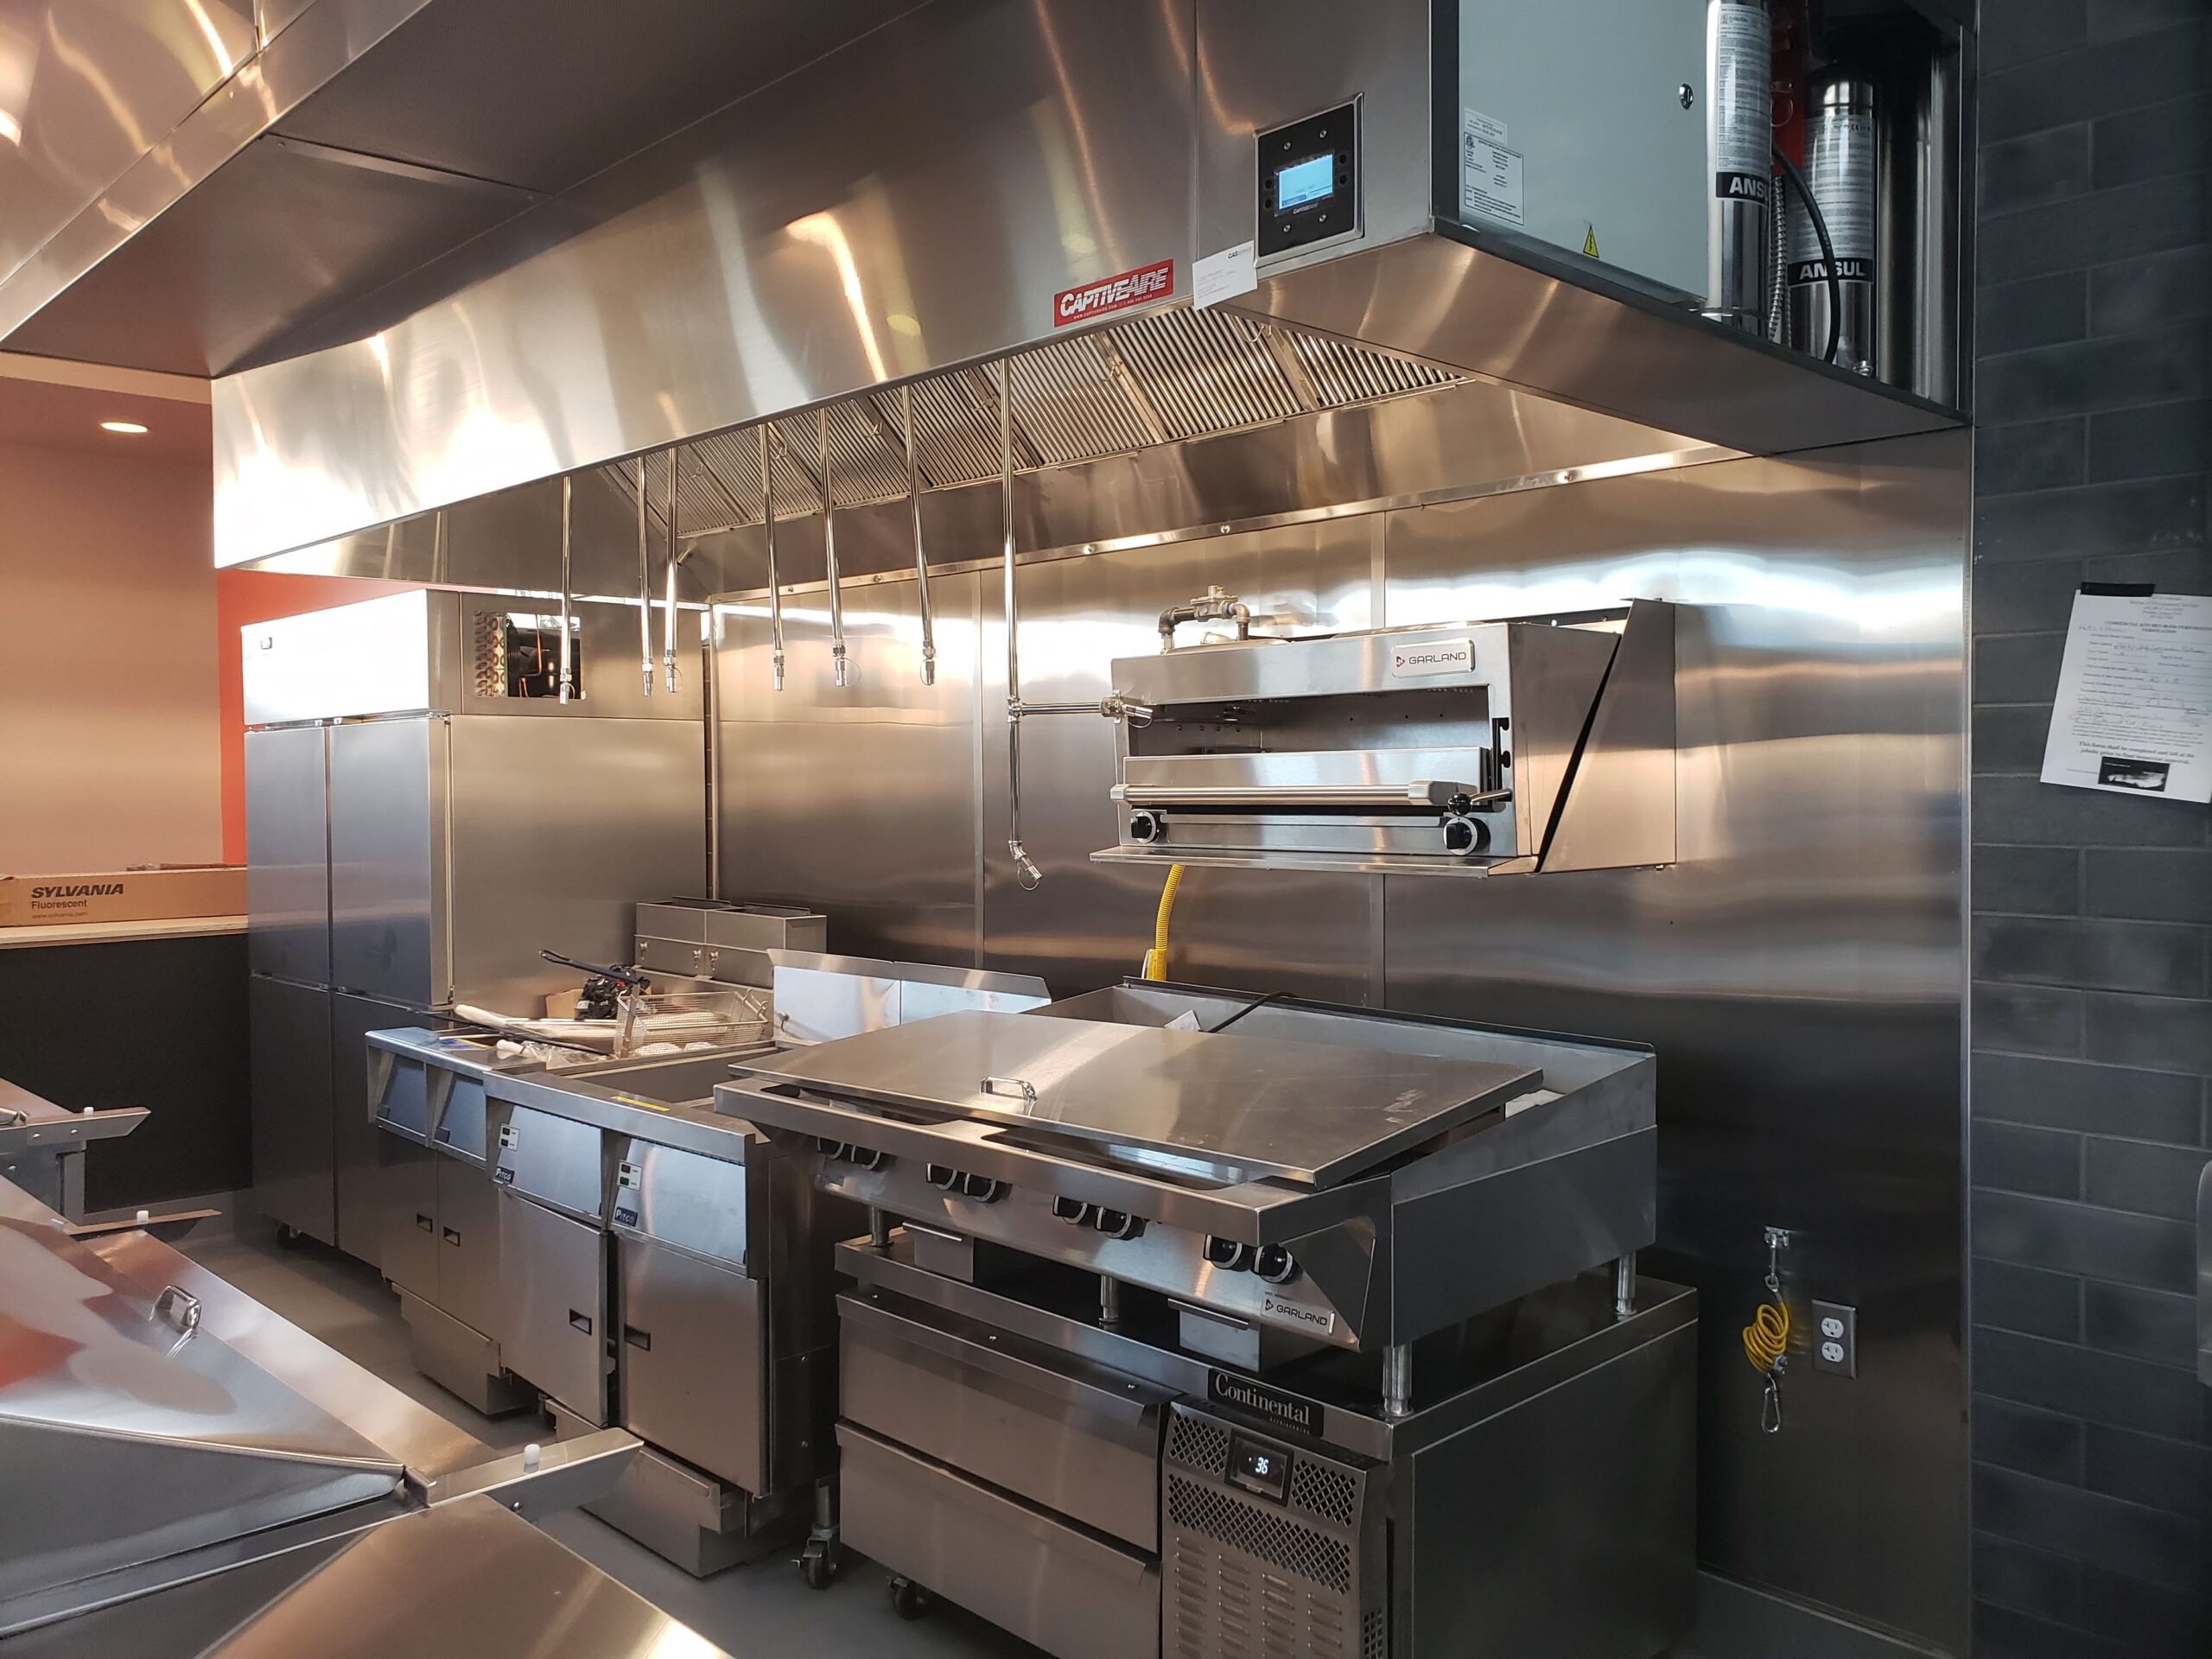 Rox Services Offers Hassle-Free Commercial Kitchen Equipment Installation Services At The Best Price.